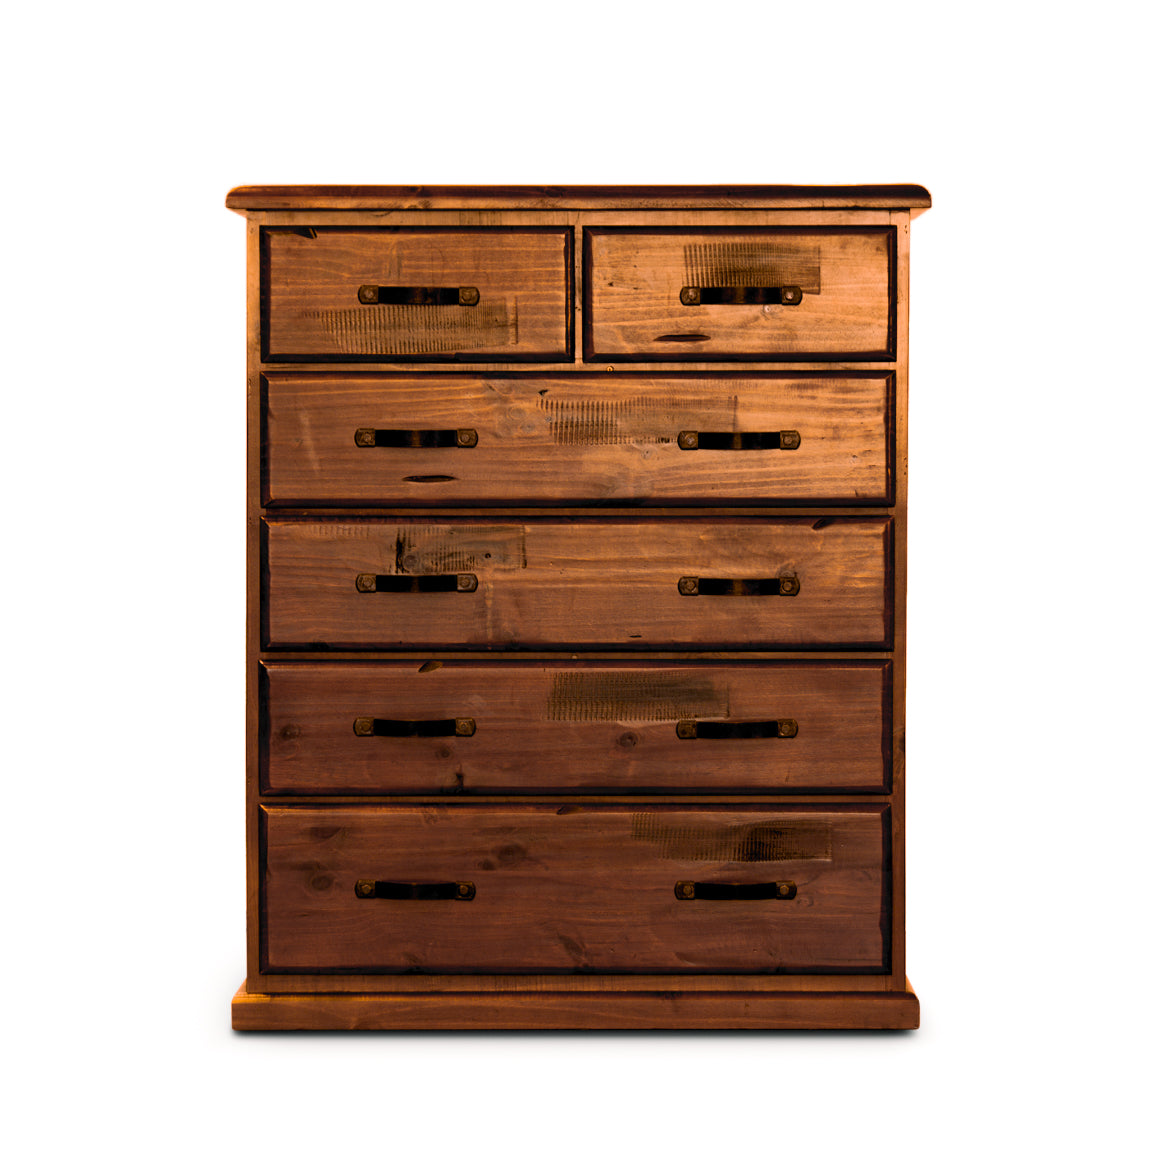 Fully Assembled! Quality Tallboy 6 Chest of Drawers Solid Pine Wood - Dark Brown